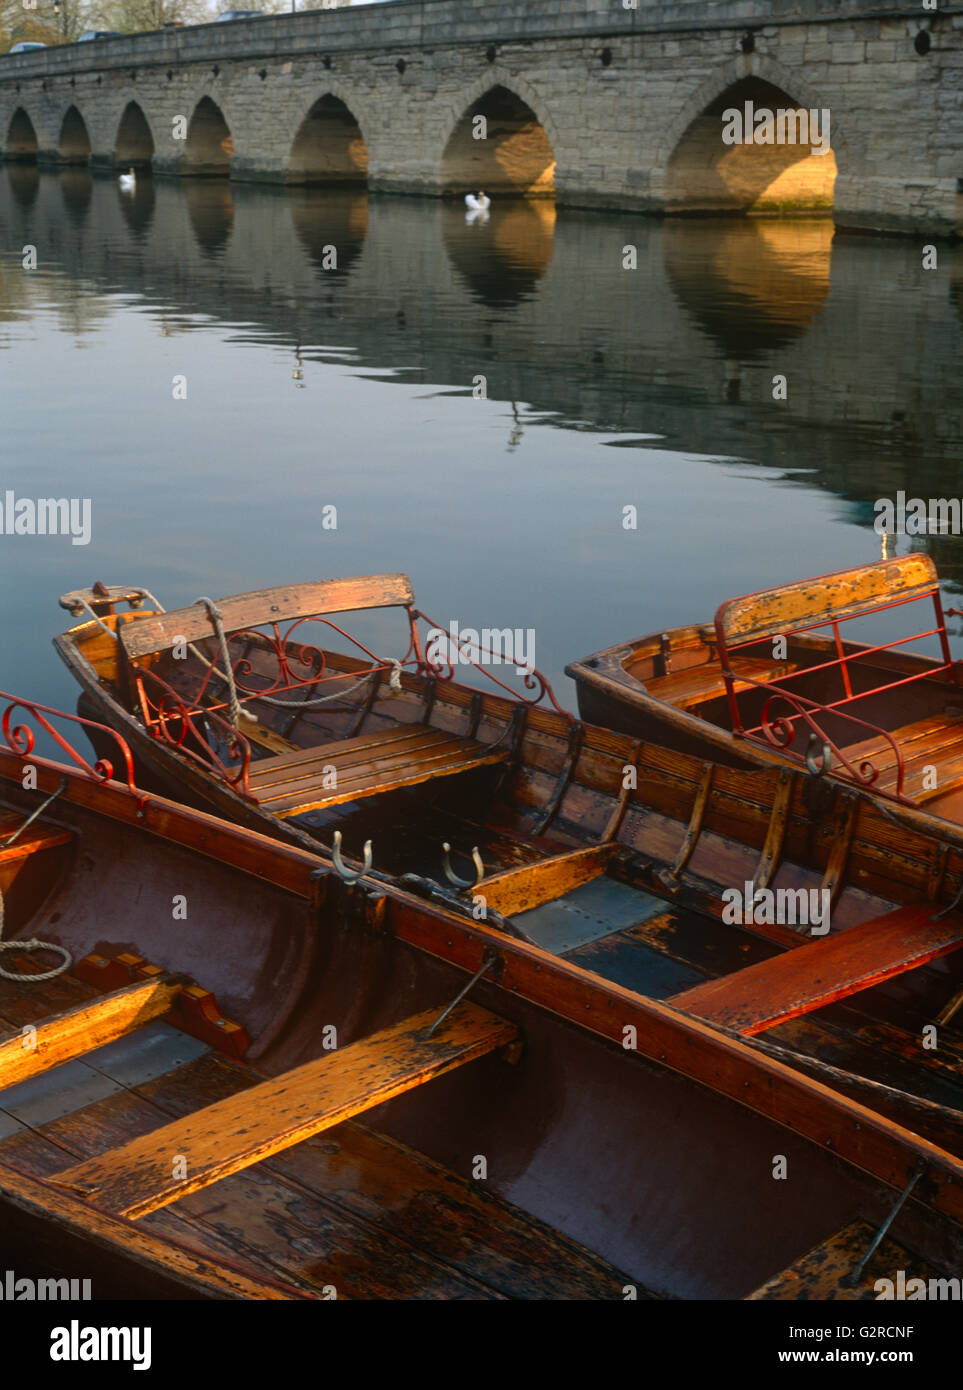 Old wooden boats docked up on the river Stock Photo